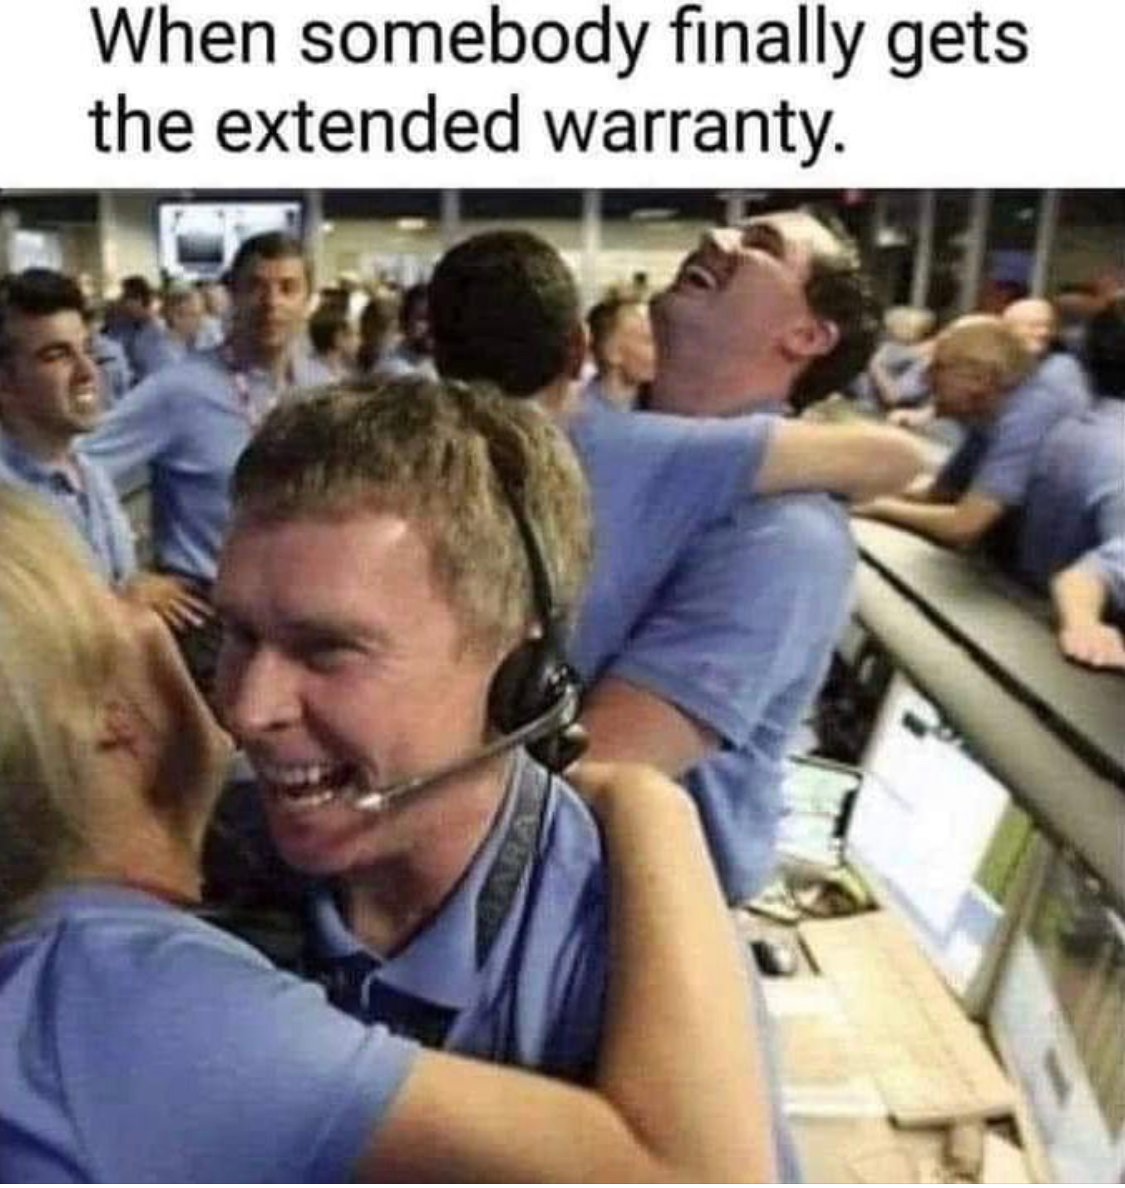 Meme of call agents celebrating with the text "When somebody finally gets the extended warranty."